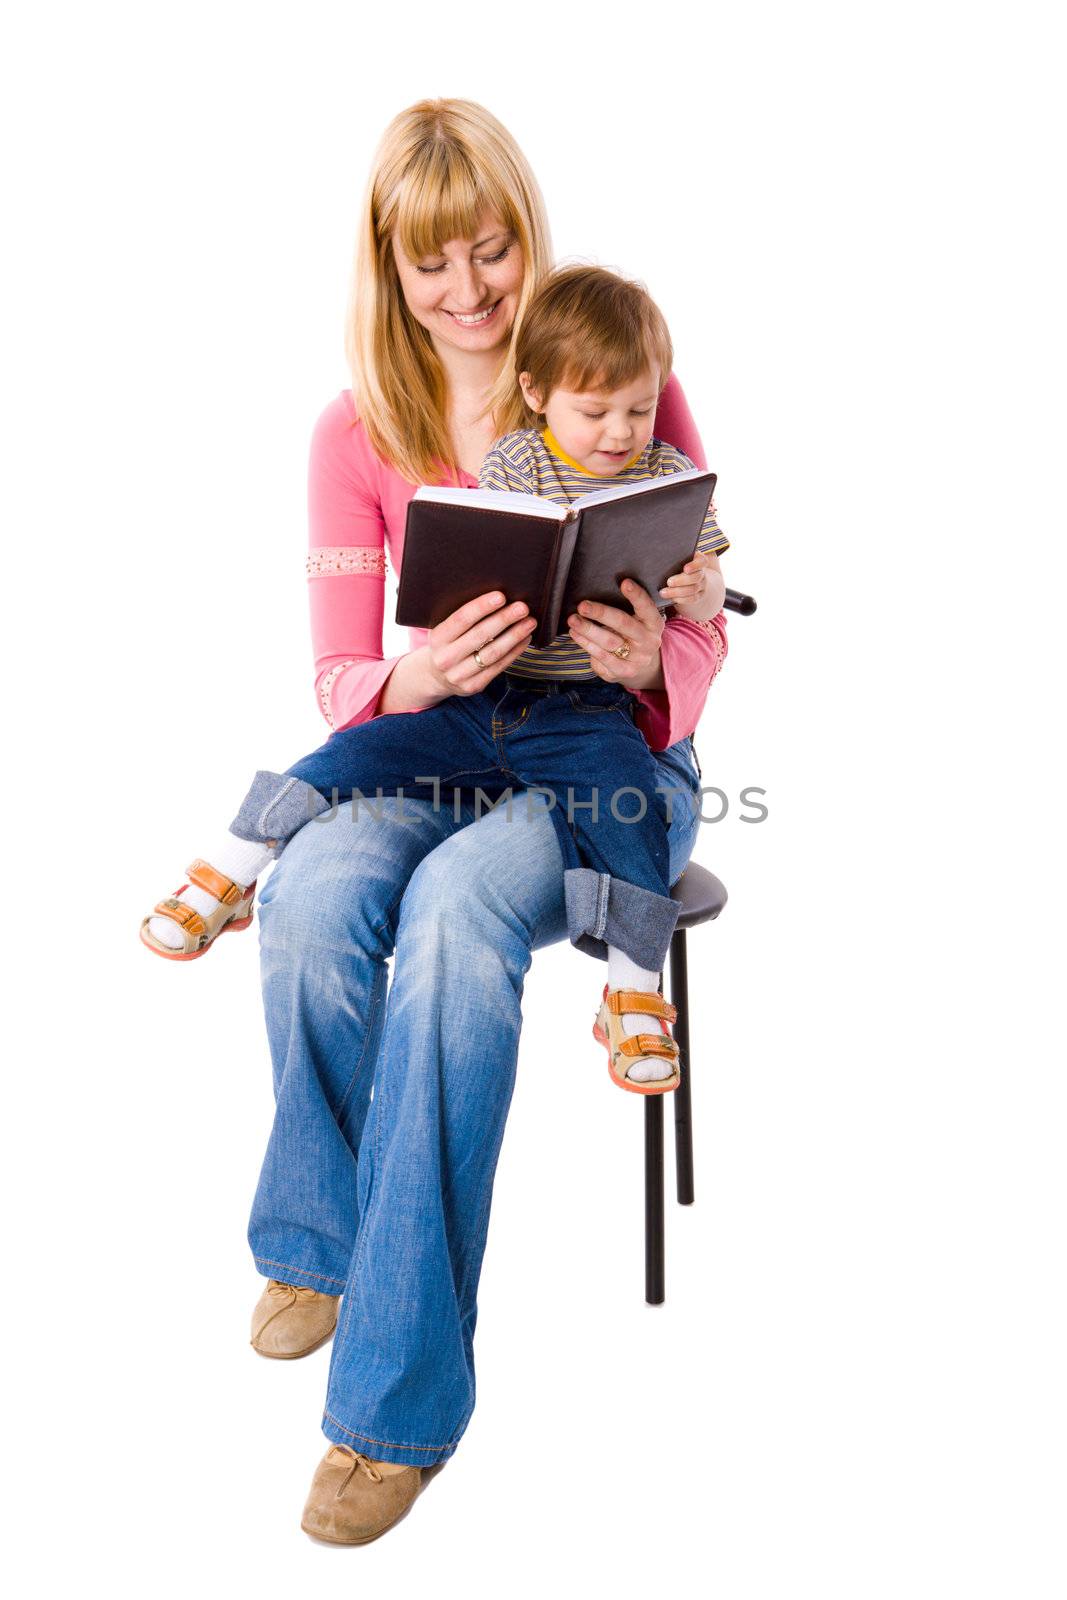 Mother reading book to her son isolated on white